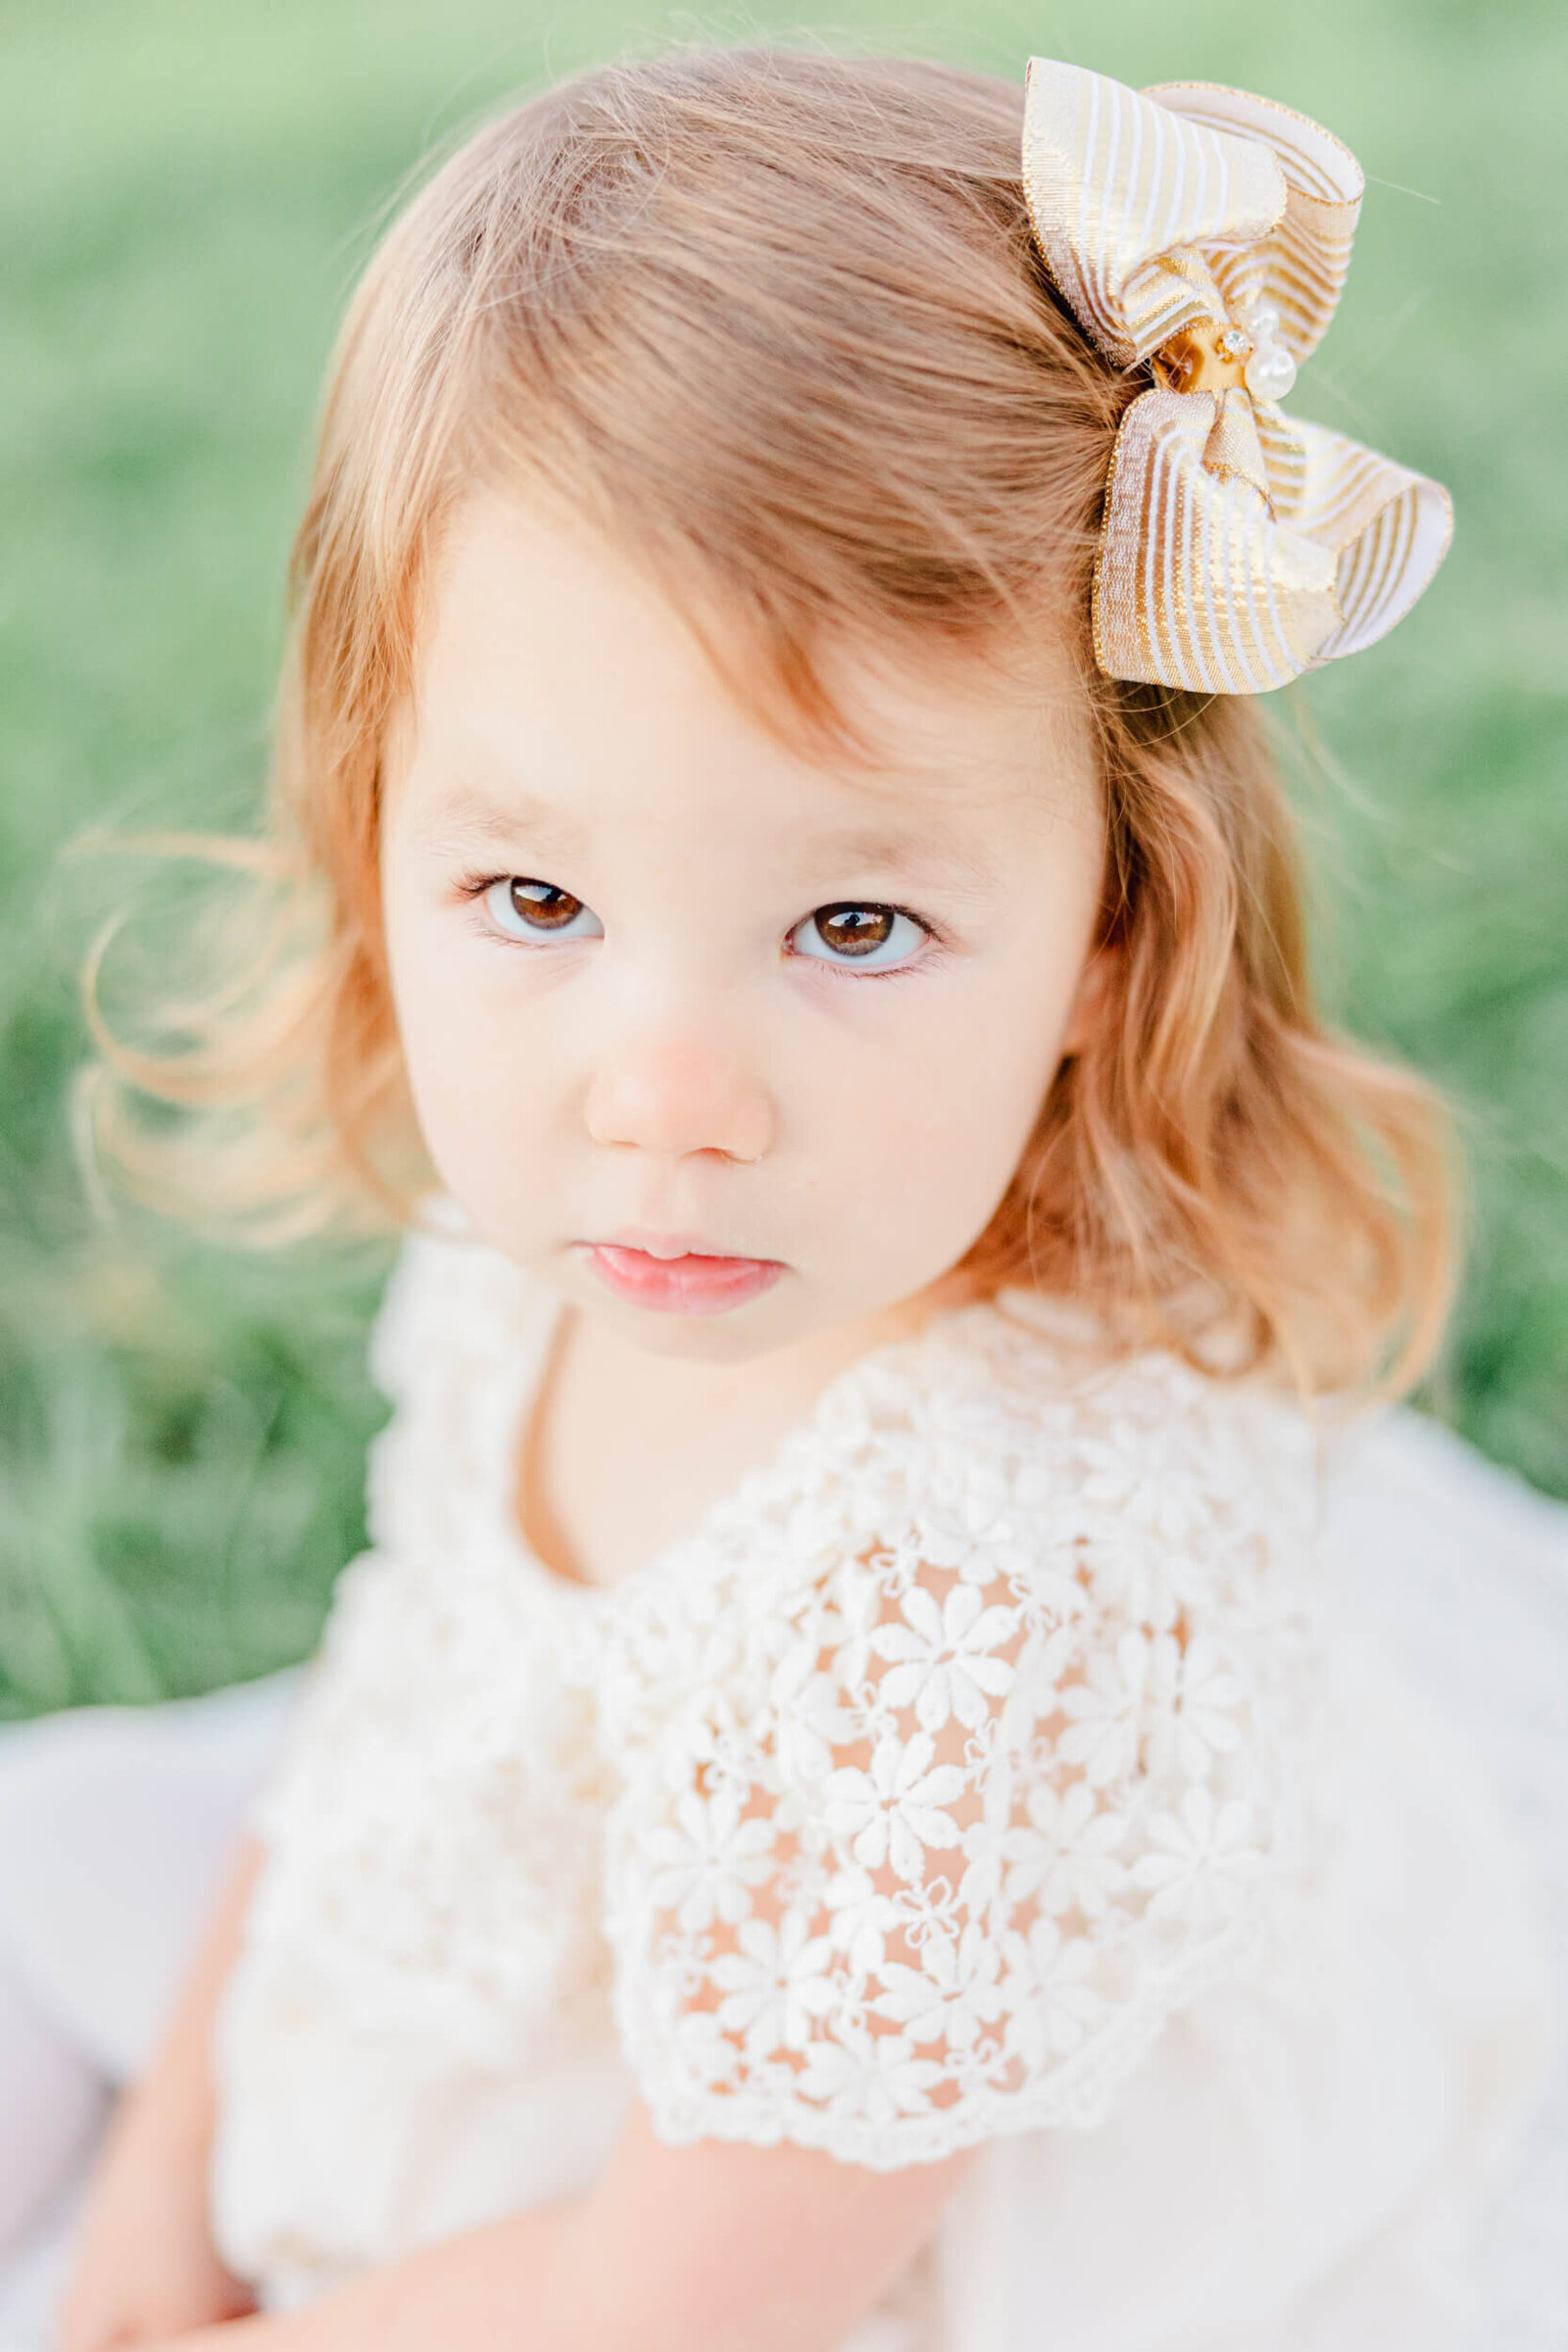 little girl in a white dress and a gold bow looks up